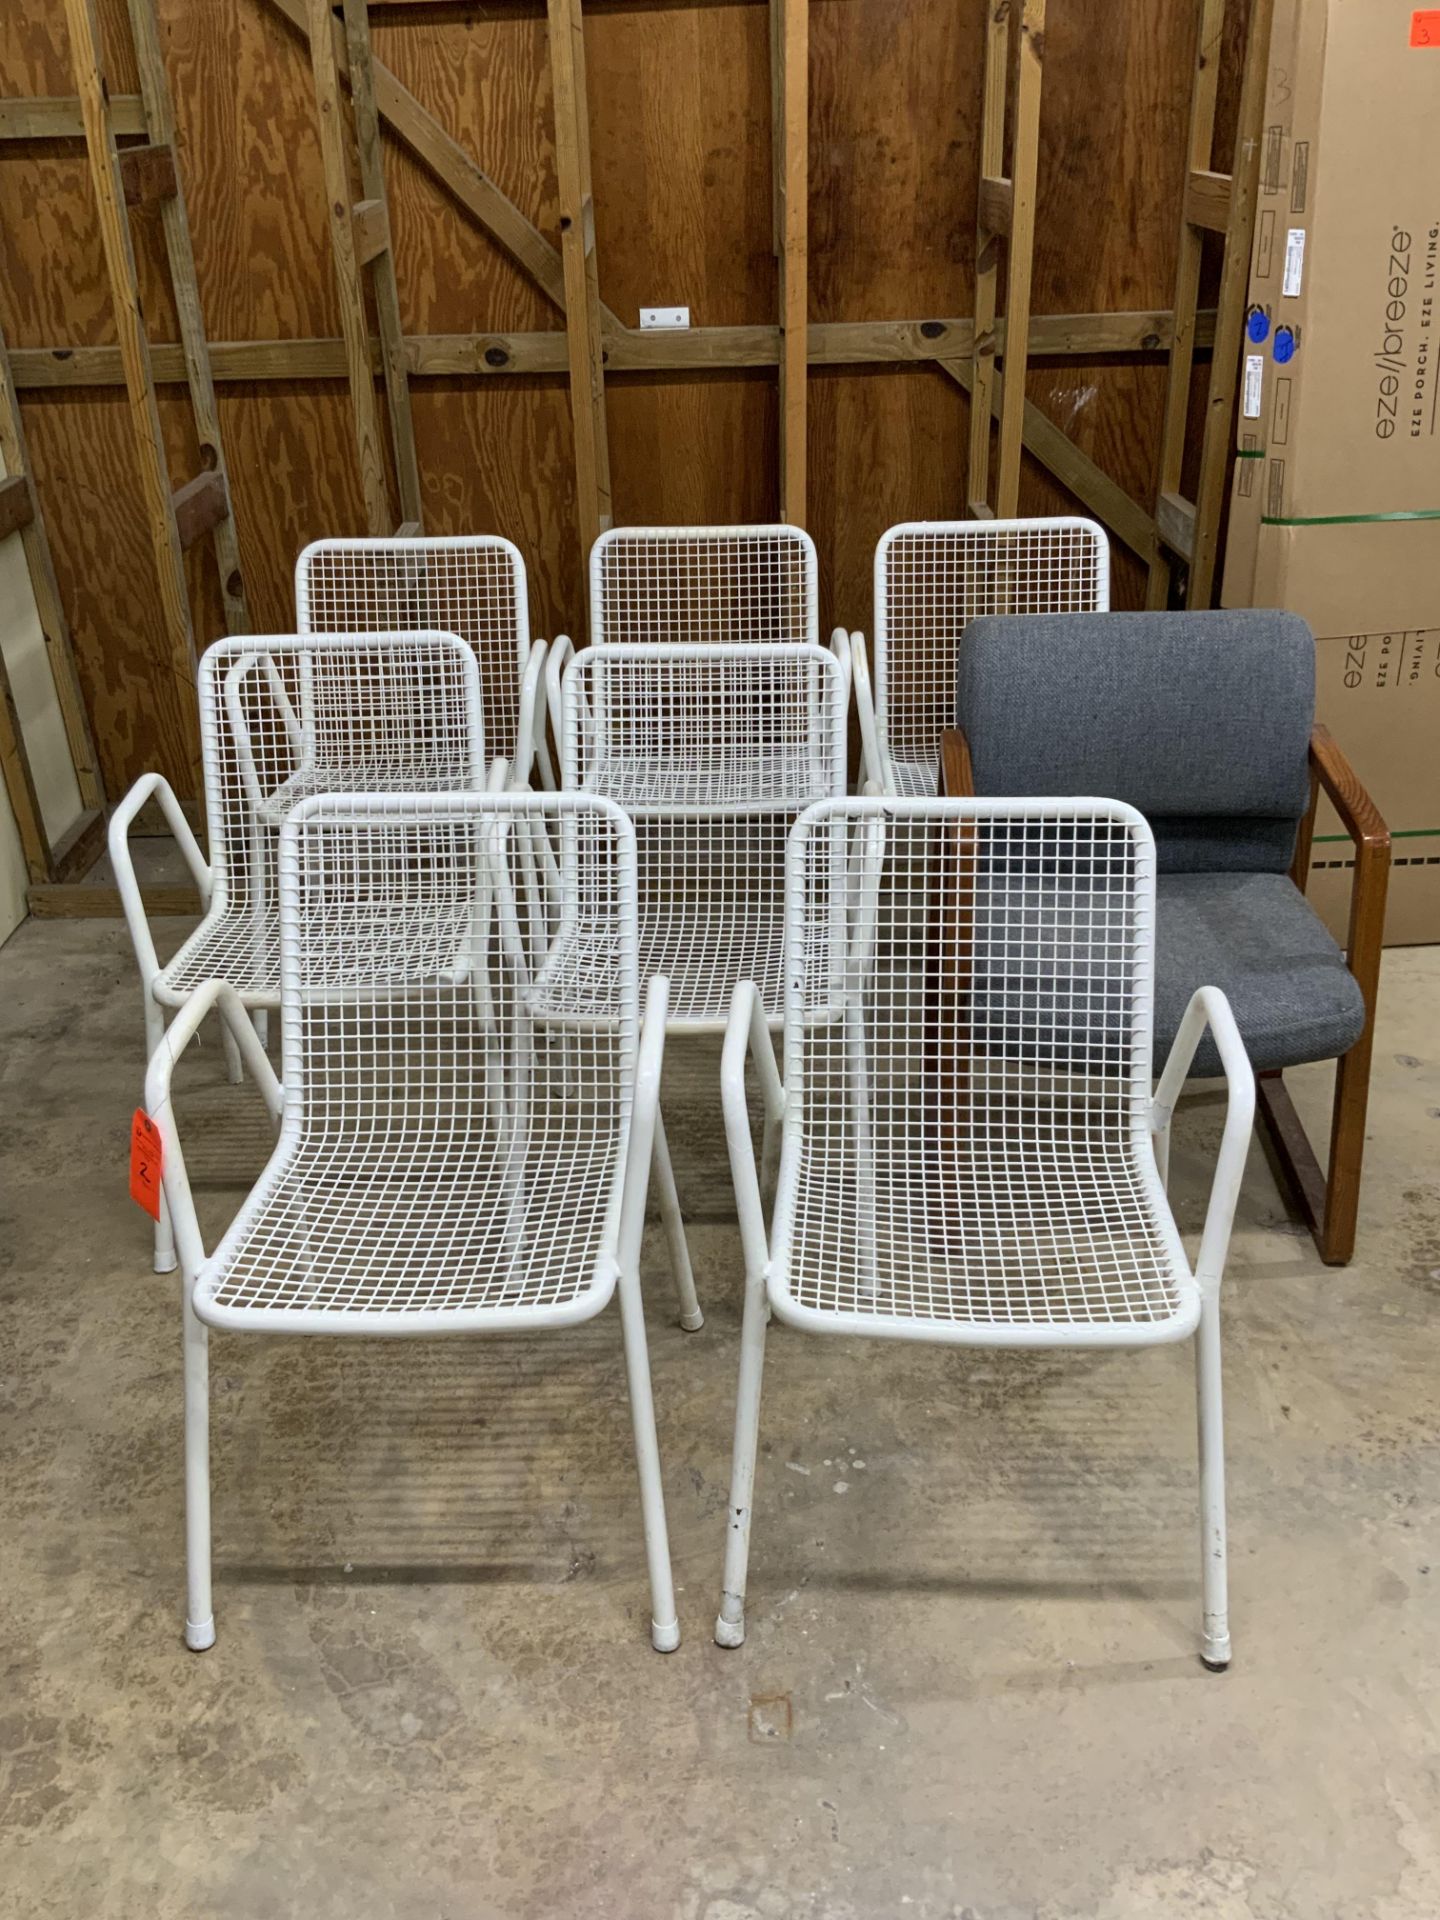 8 Mid-Century Modern Outdoor Chairs (One in rough condition, the rest in good used condition.)